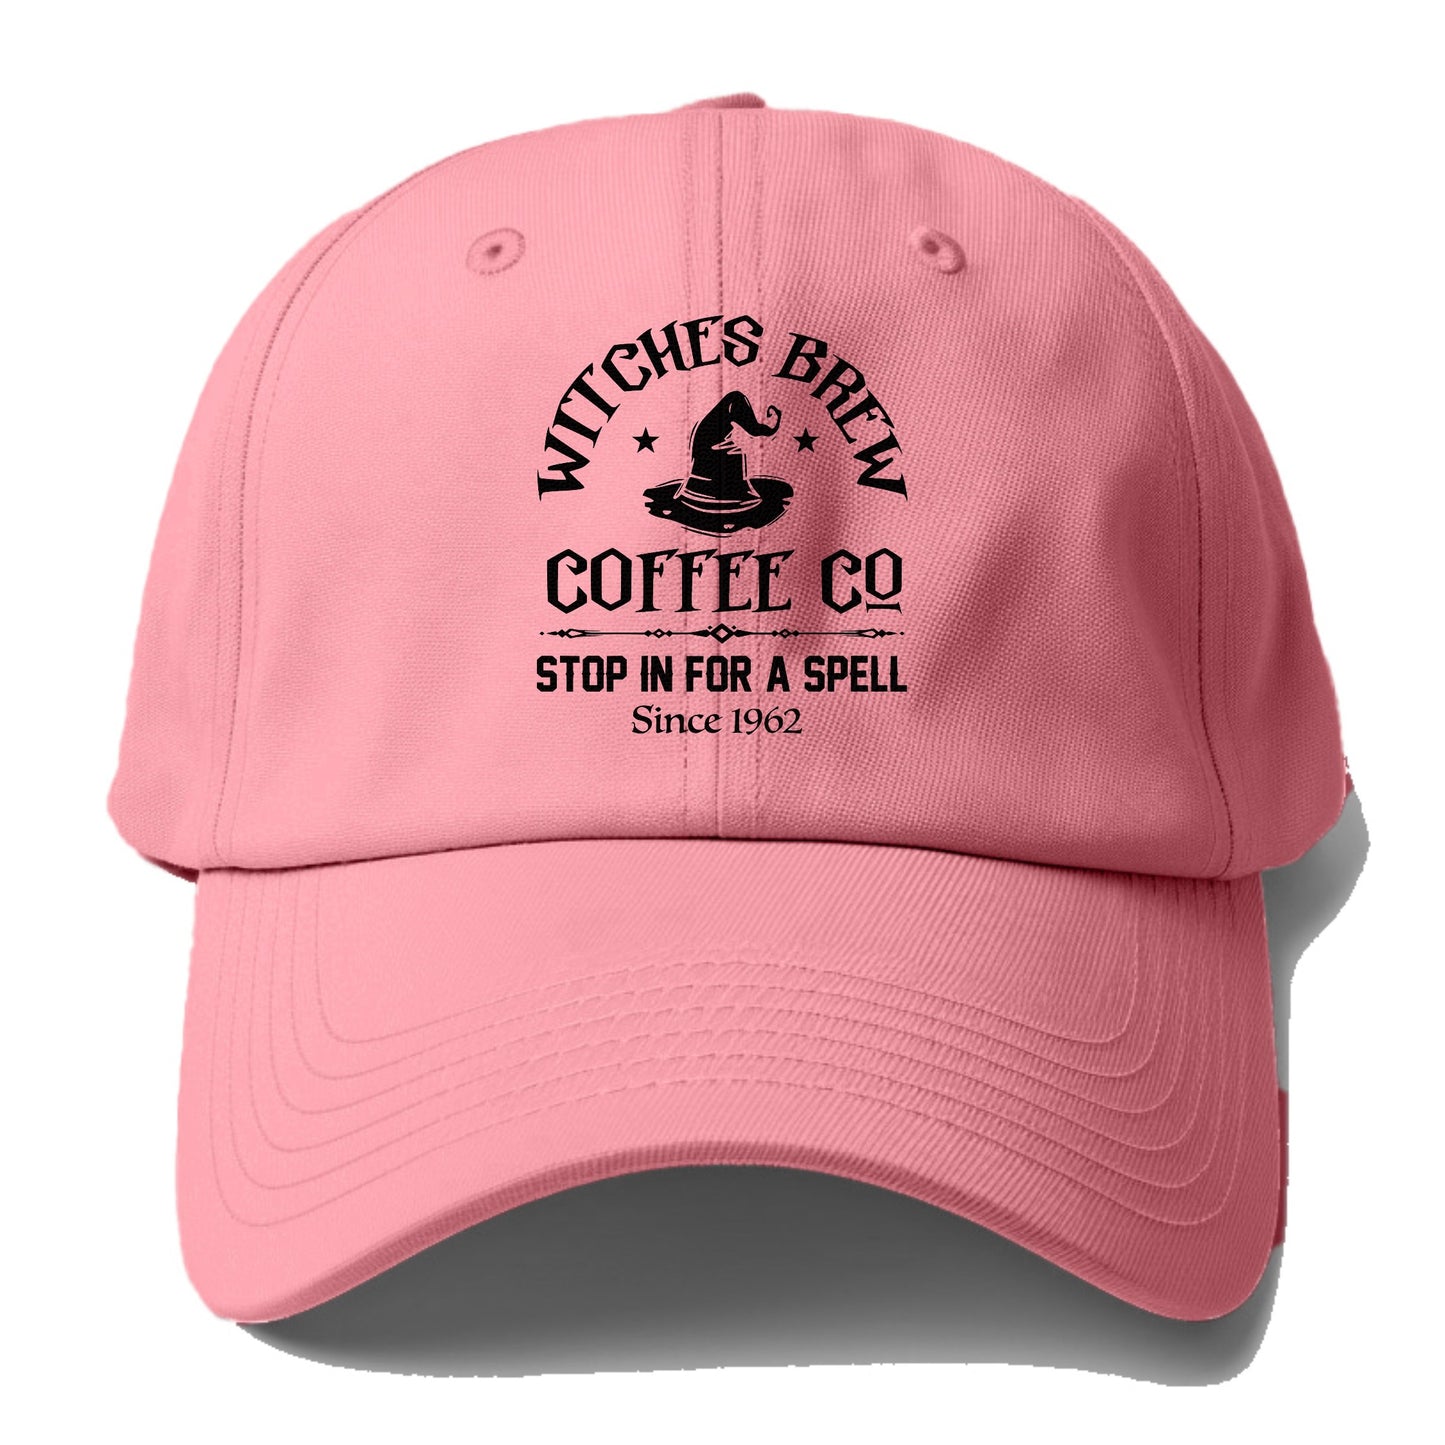 witches brew coffee co shop in for a spell since 1962 Hat